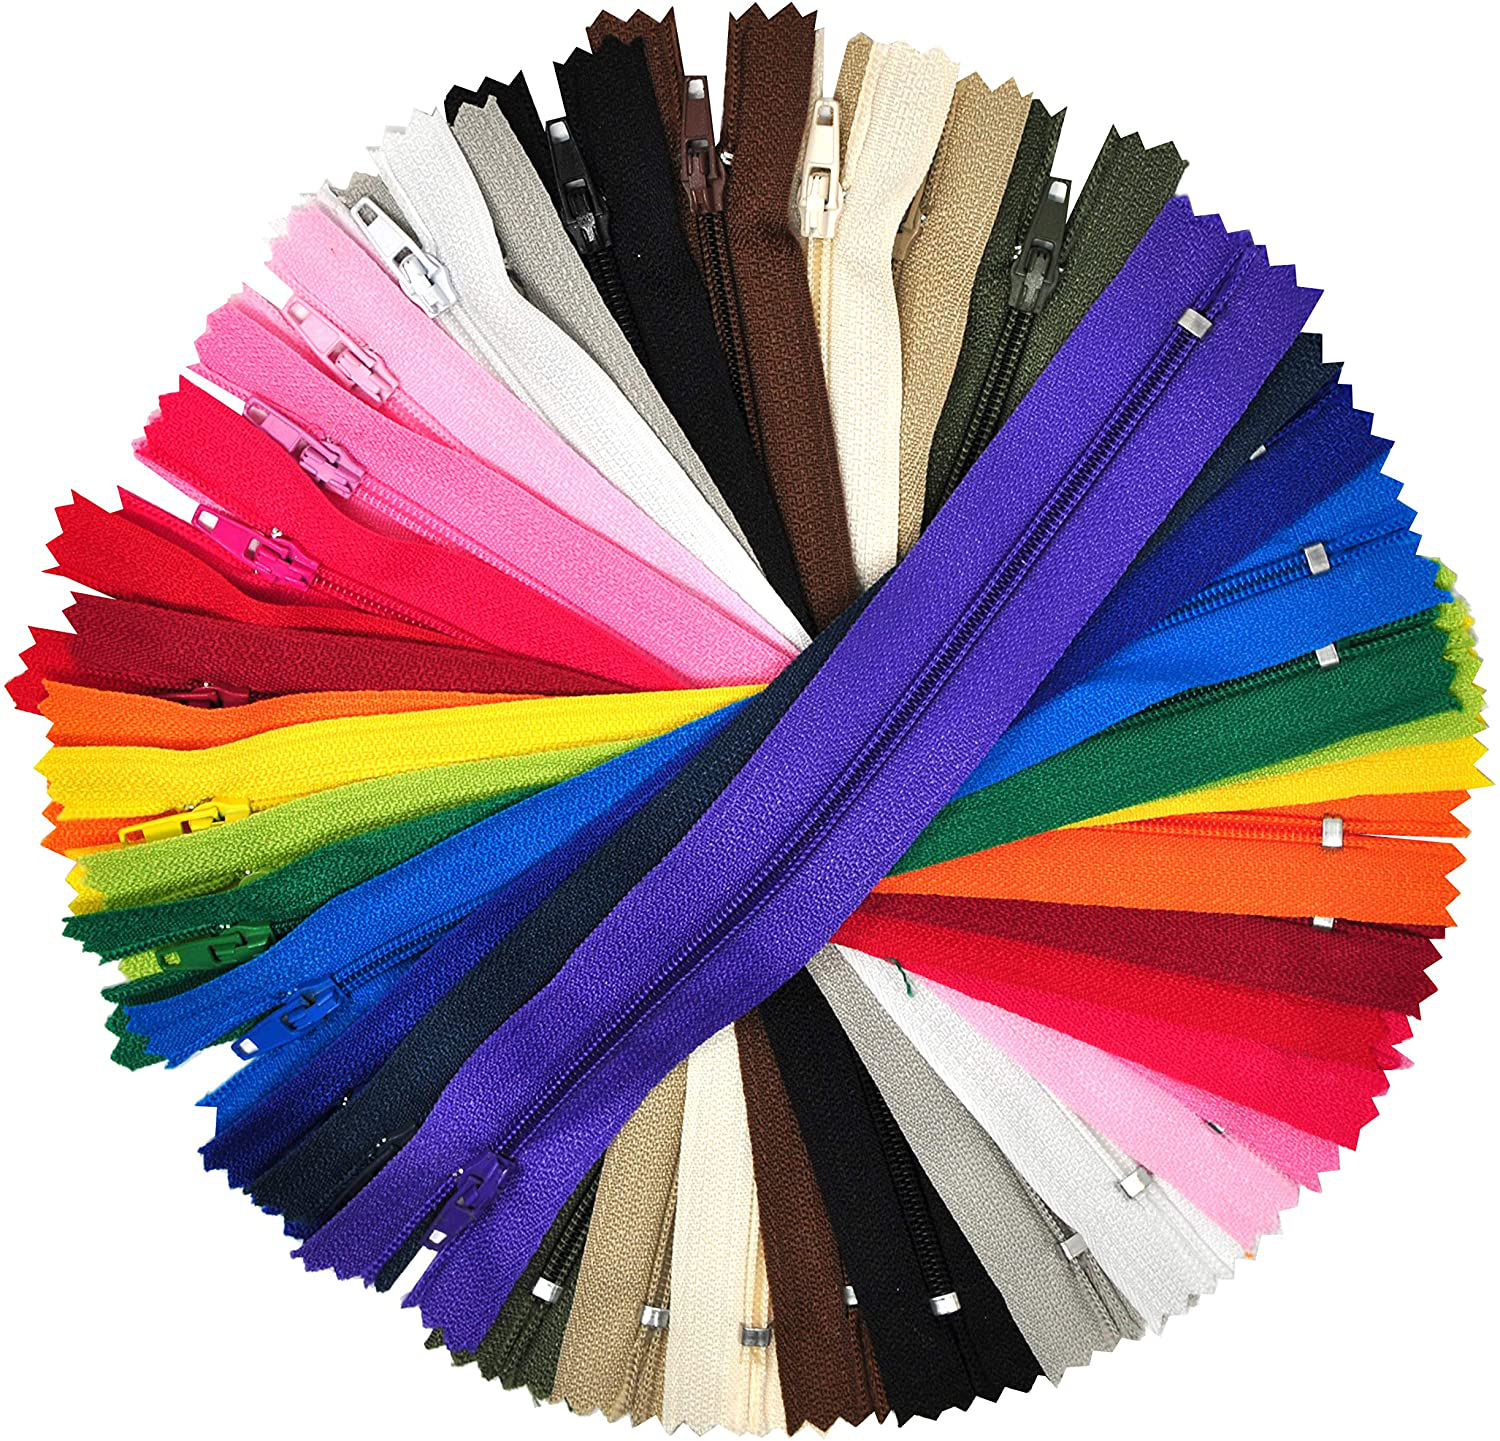 Nylon Zippers for Sewing, Bulk Zipper Supplies ; by Mandala Crafts - 20 Assorted Colors / 28 Inches